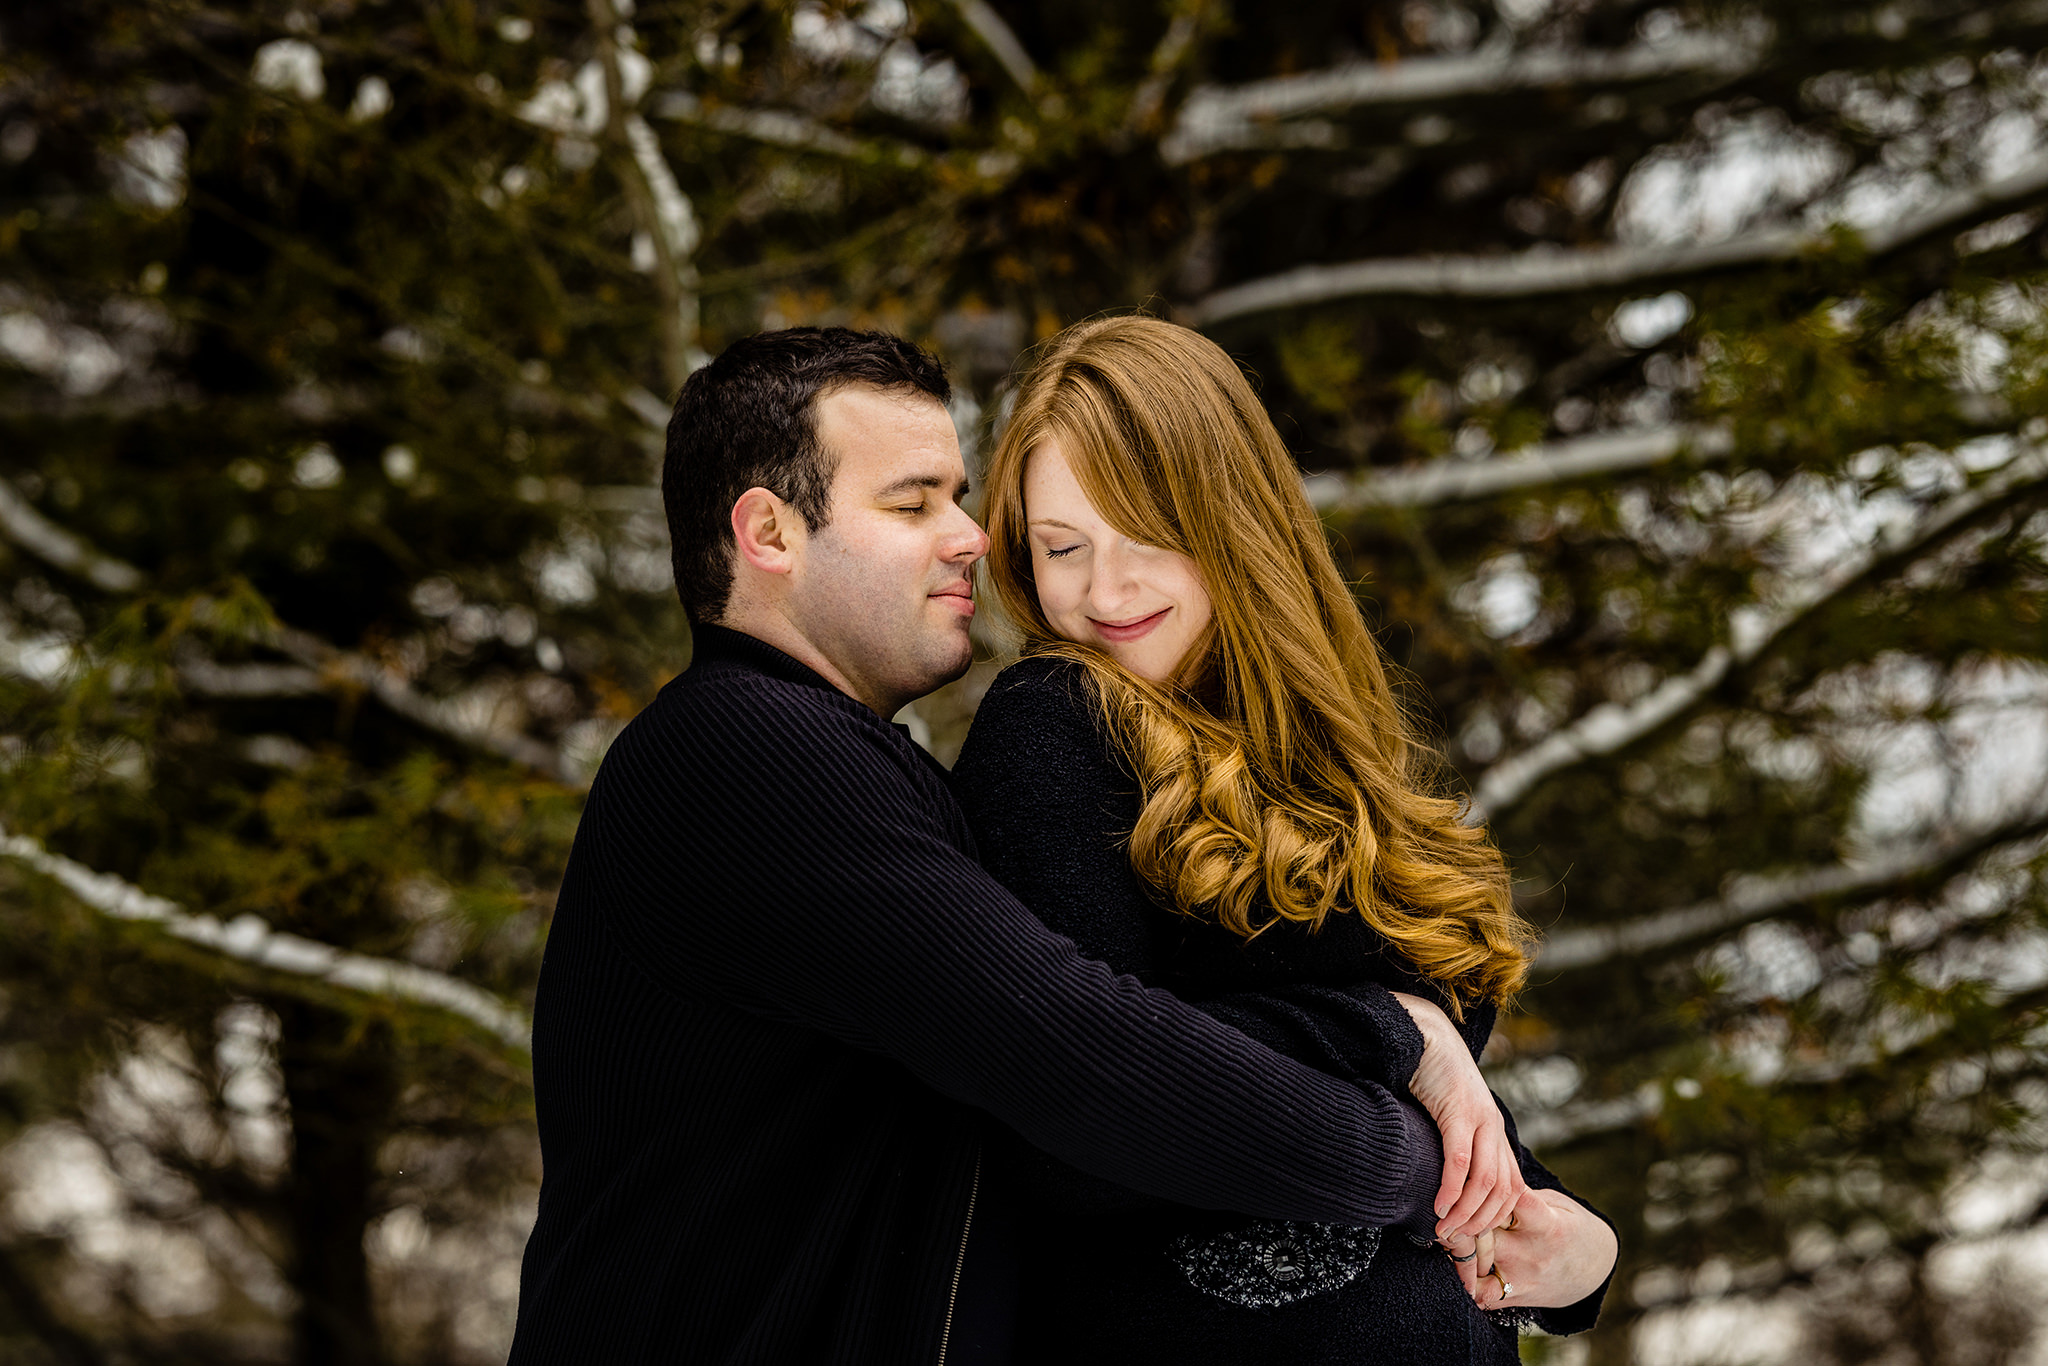 Woman smiling looking back at fiance hugging her in a snowy forest.